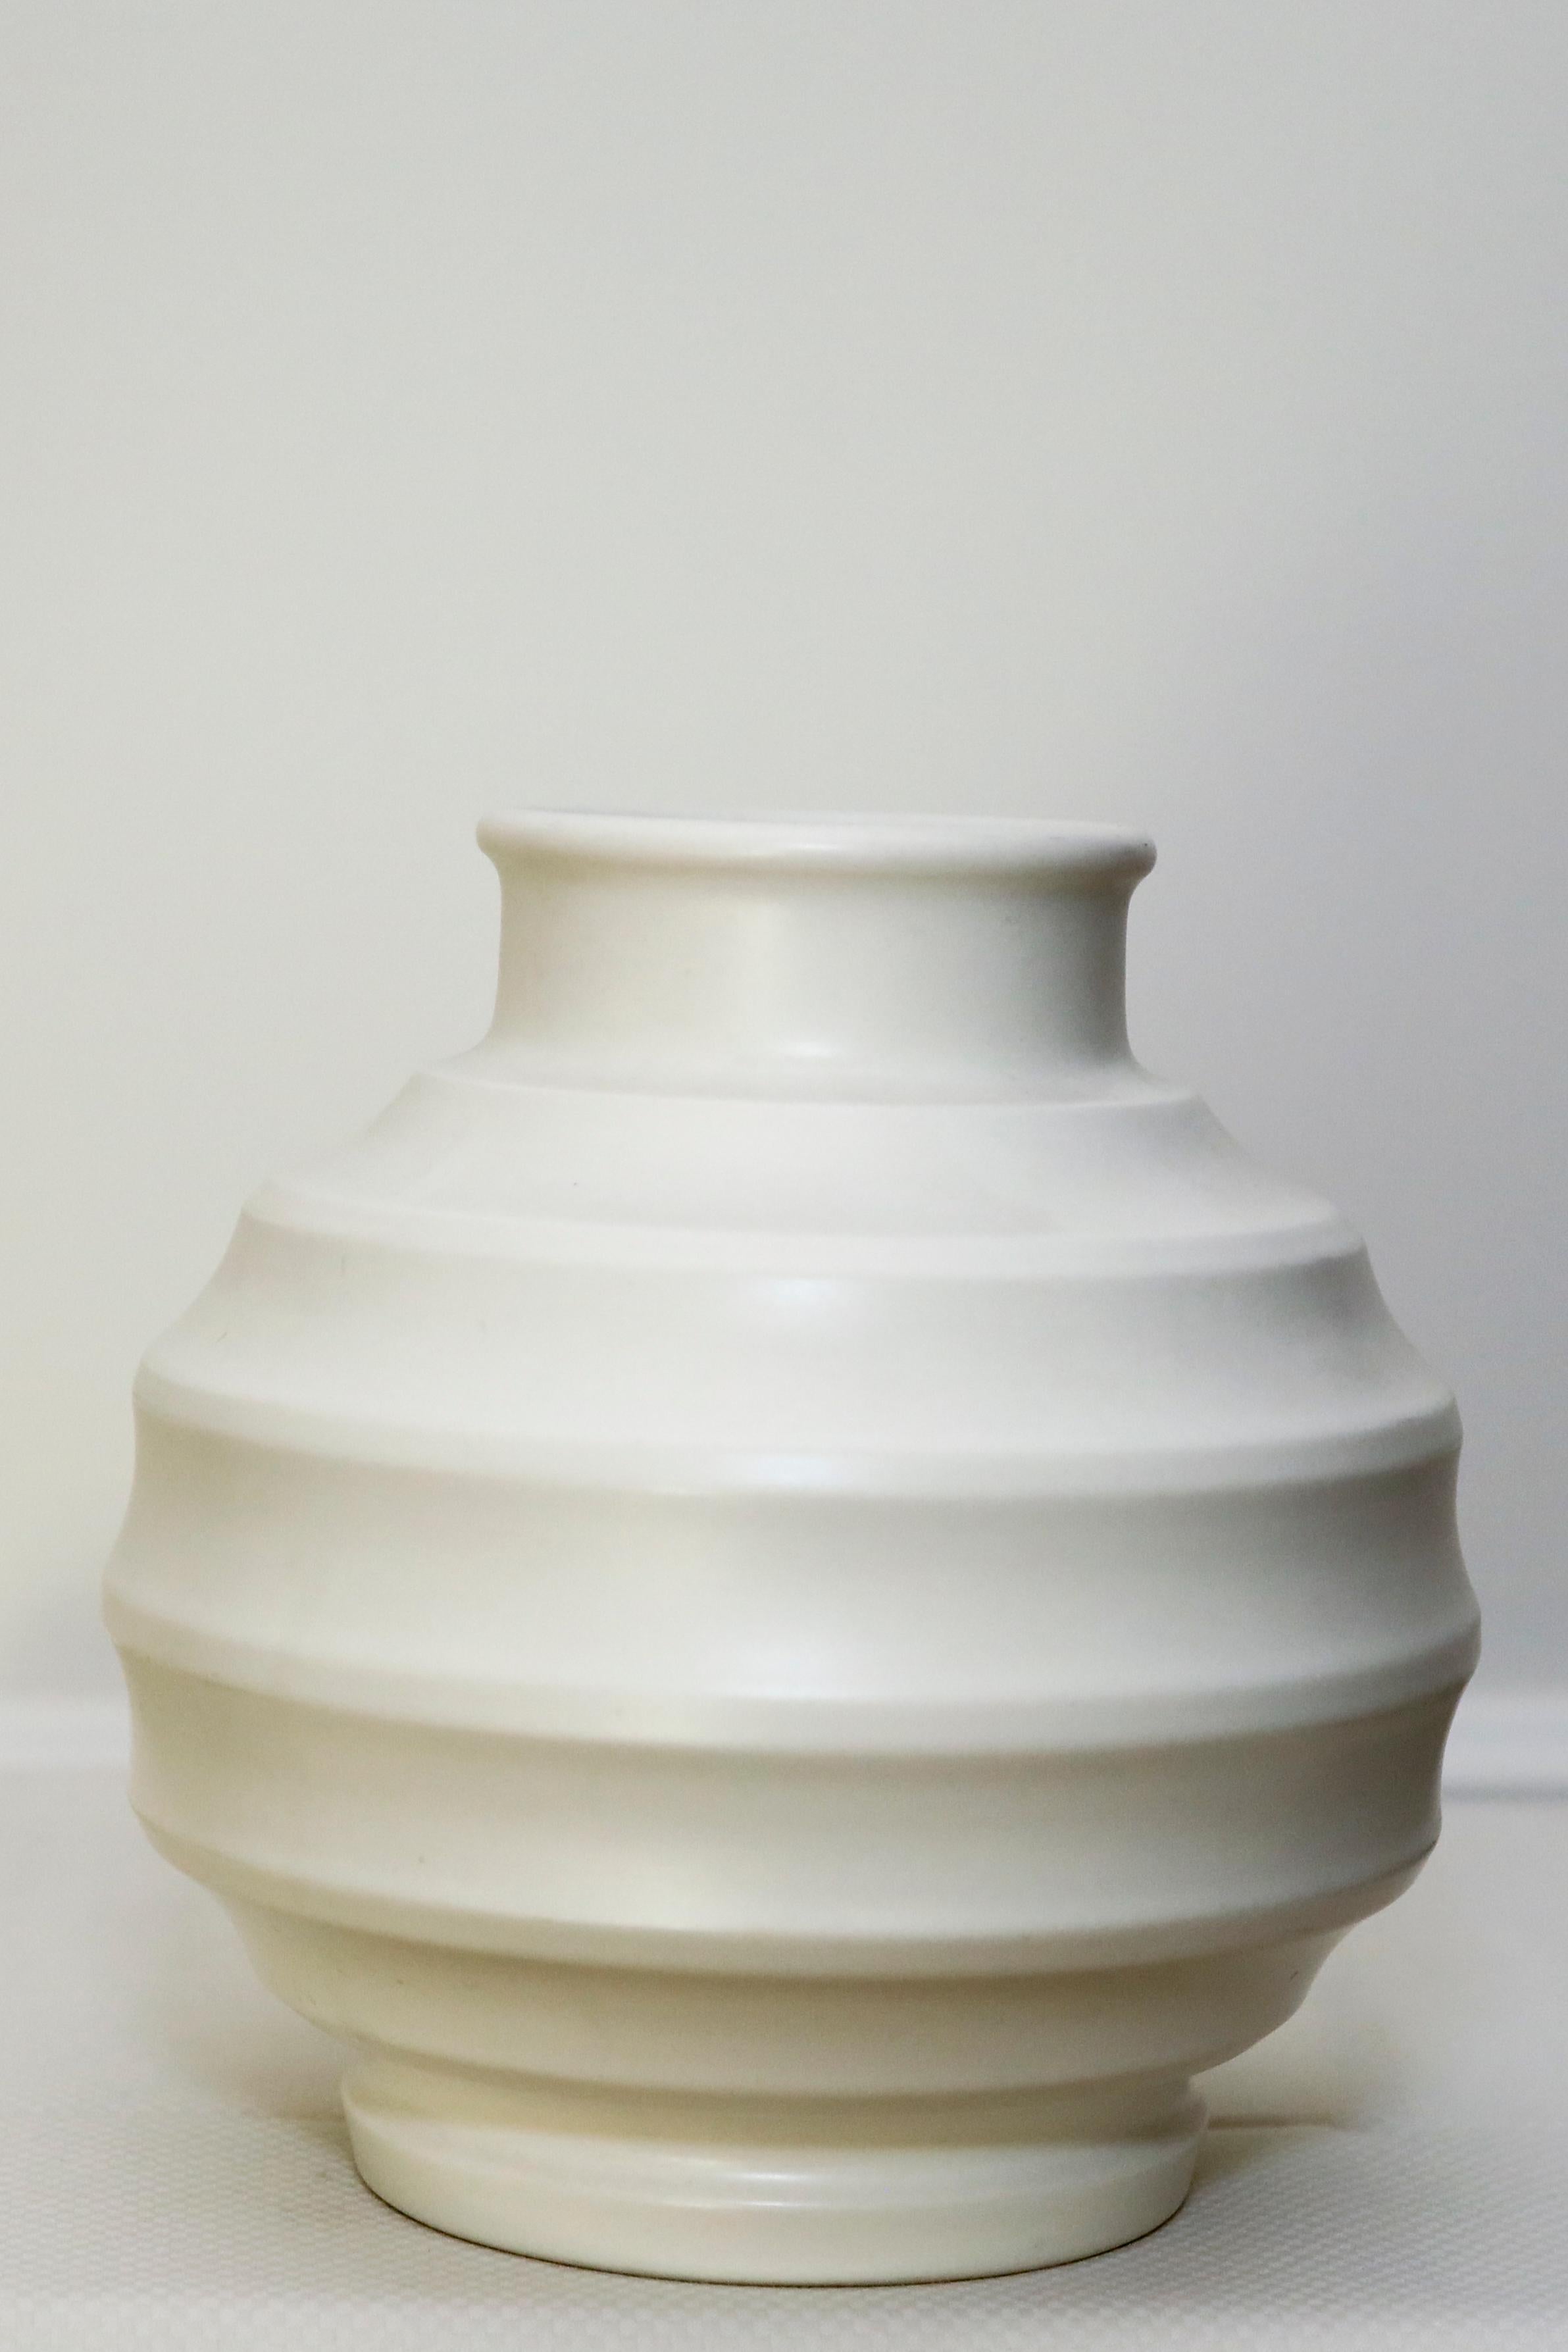 Keith Murray "Bombe" Vases in Moonstone (other colors available)